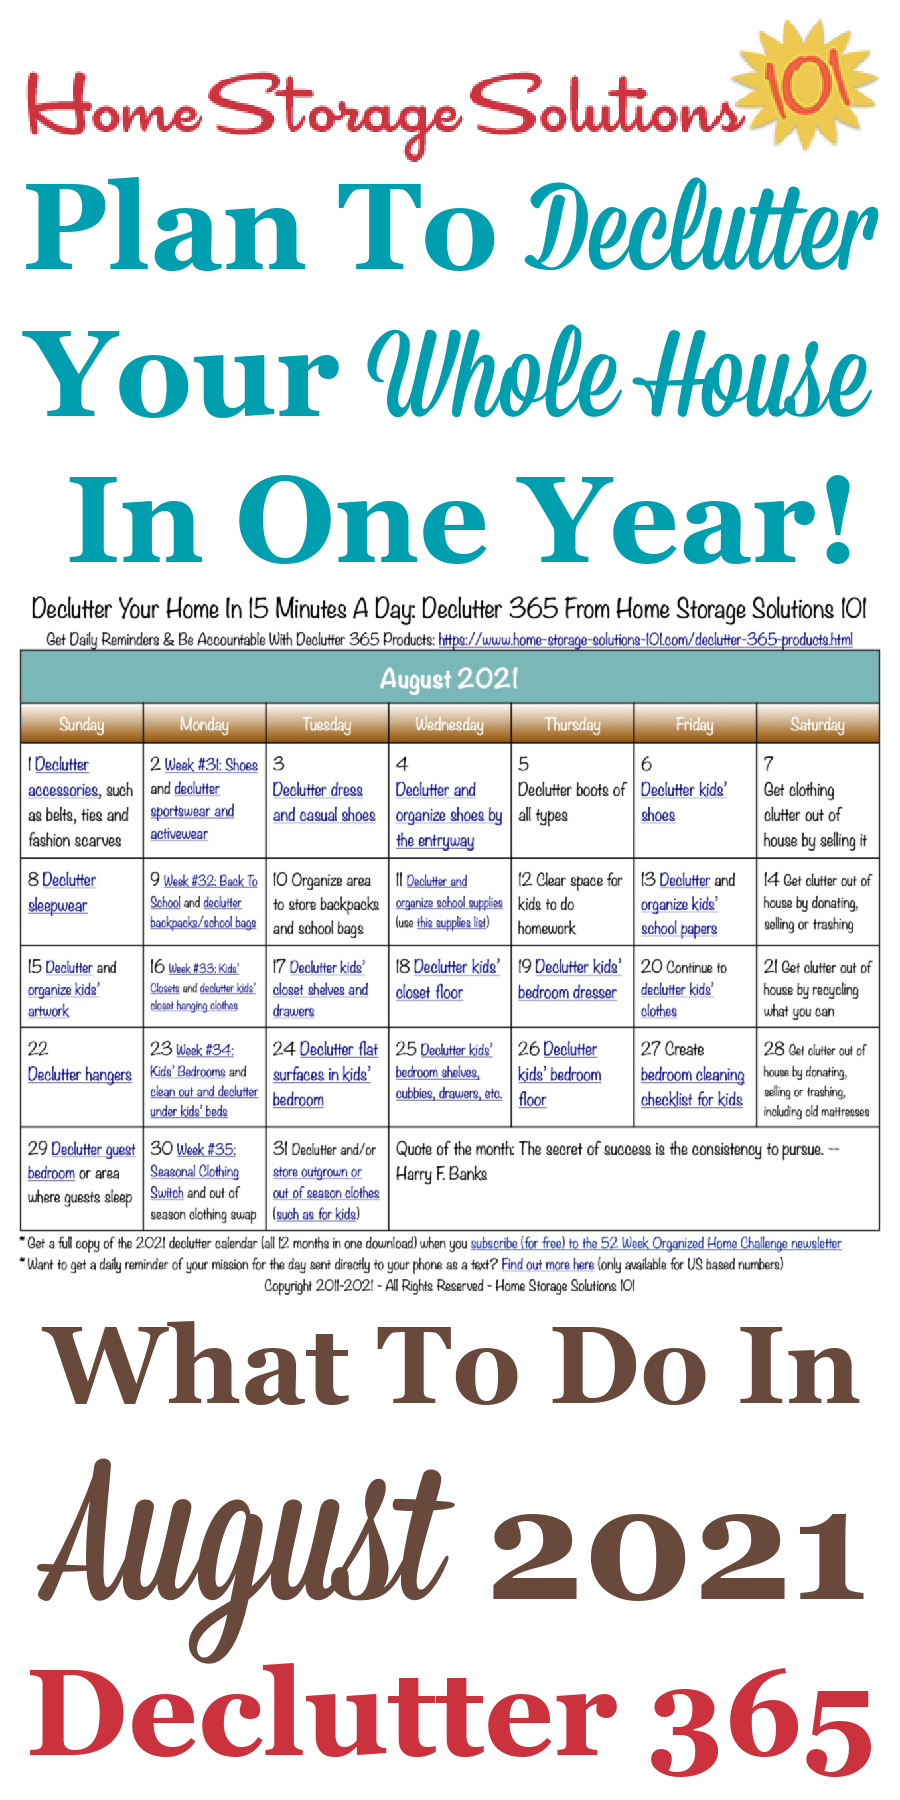 Free printable August 2021 #decluttering calendar with daily 15 minute missions. Follow the entire #Declutter365 plan provided by Home Storage Solutions 101 to #declutter your whole house in a year.